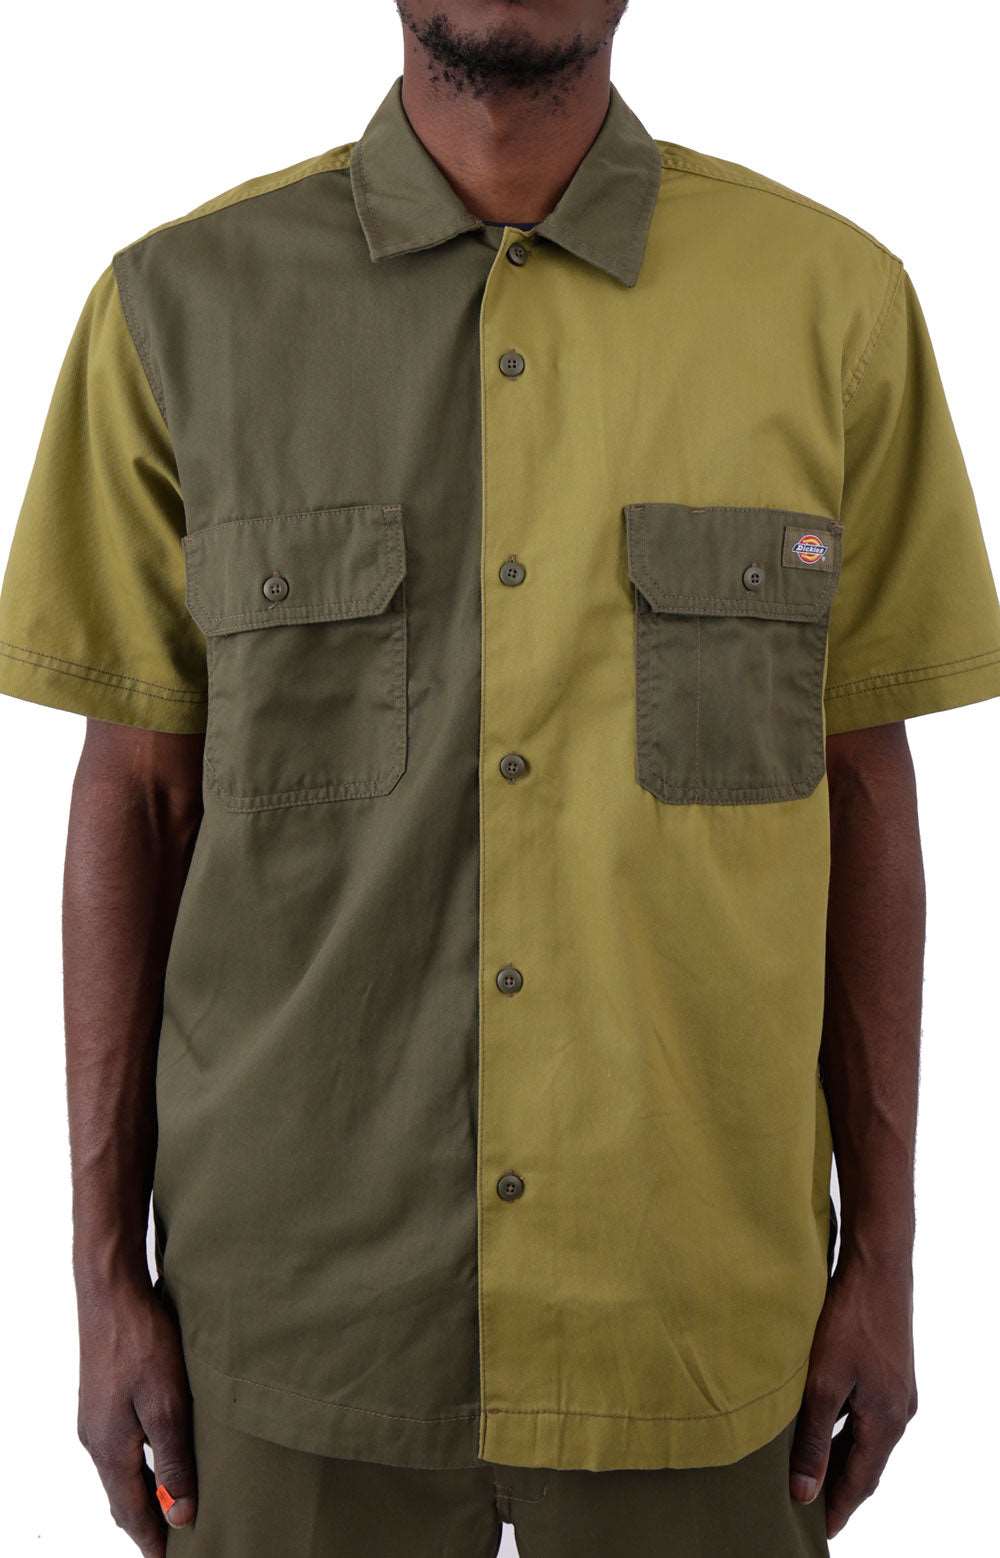 (WSR12R2G) Embroidered Short Sleeve Work Shirt - Rinsed Military/Moss Green